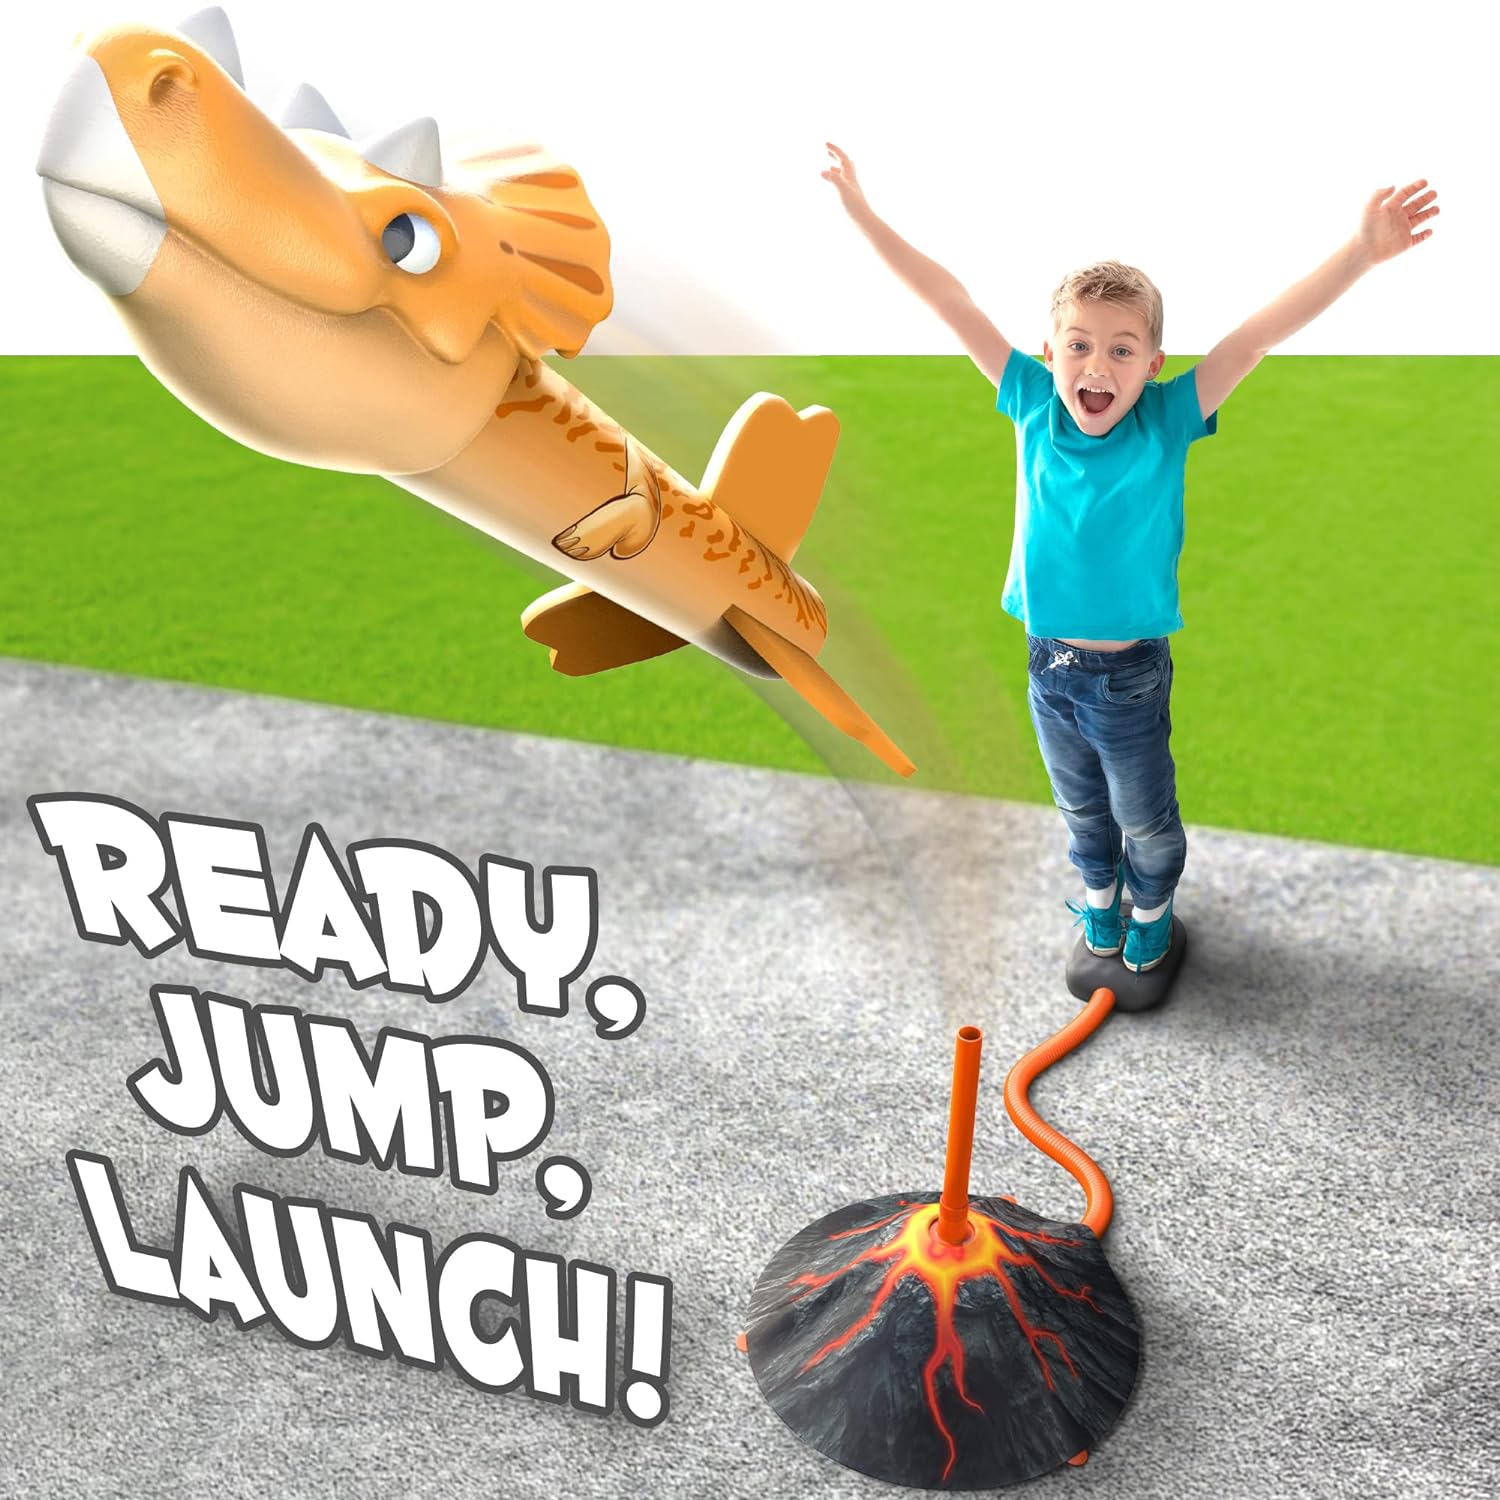 MindSprout Dino Blasters, Rocket Launcher for Kids - Launch up to 100 ft. Birthday Gift, for Boys  Girls Age 3, 4, 5, 6, 7, Years Old - Outdoor Toys, Family Fun, Dinosaur Toy, Kids Toys